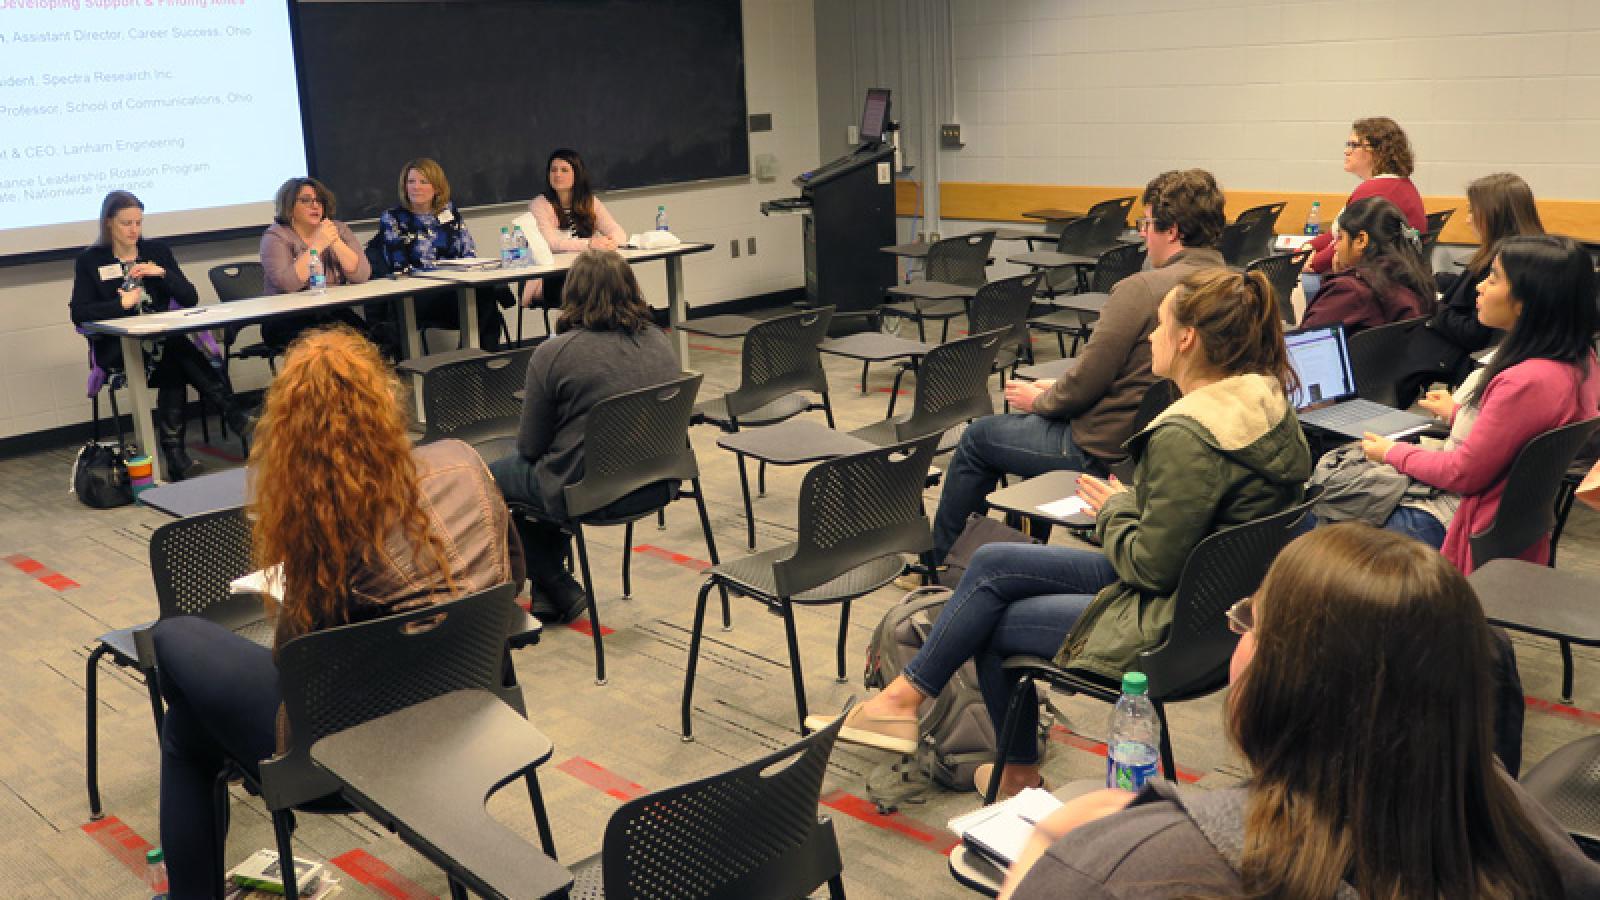 Students listen to a panel discussion during a Development Academy